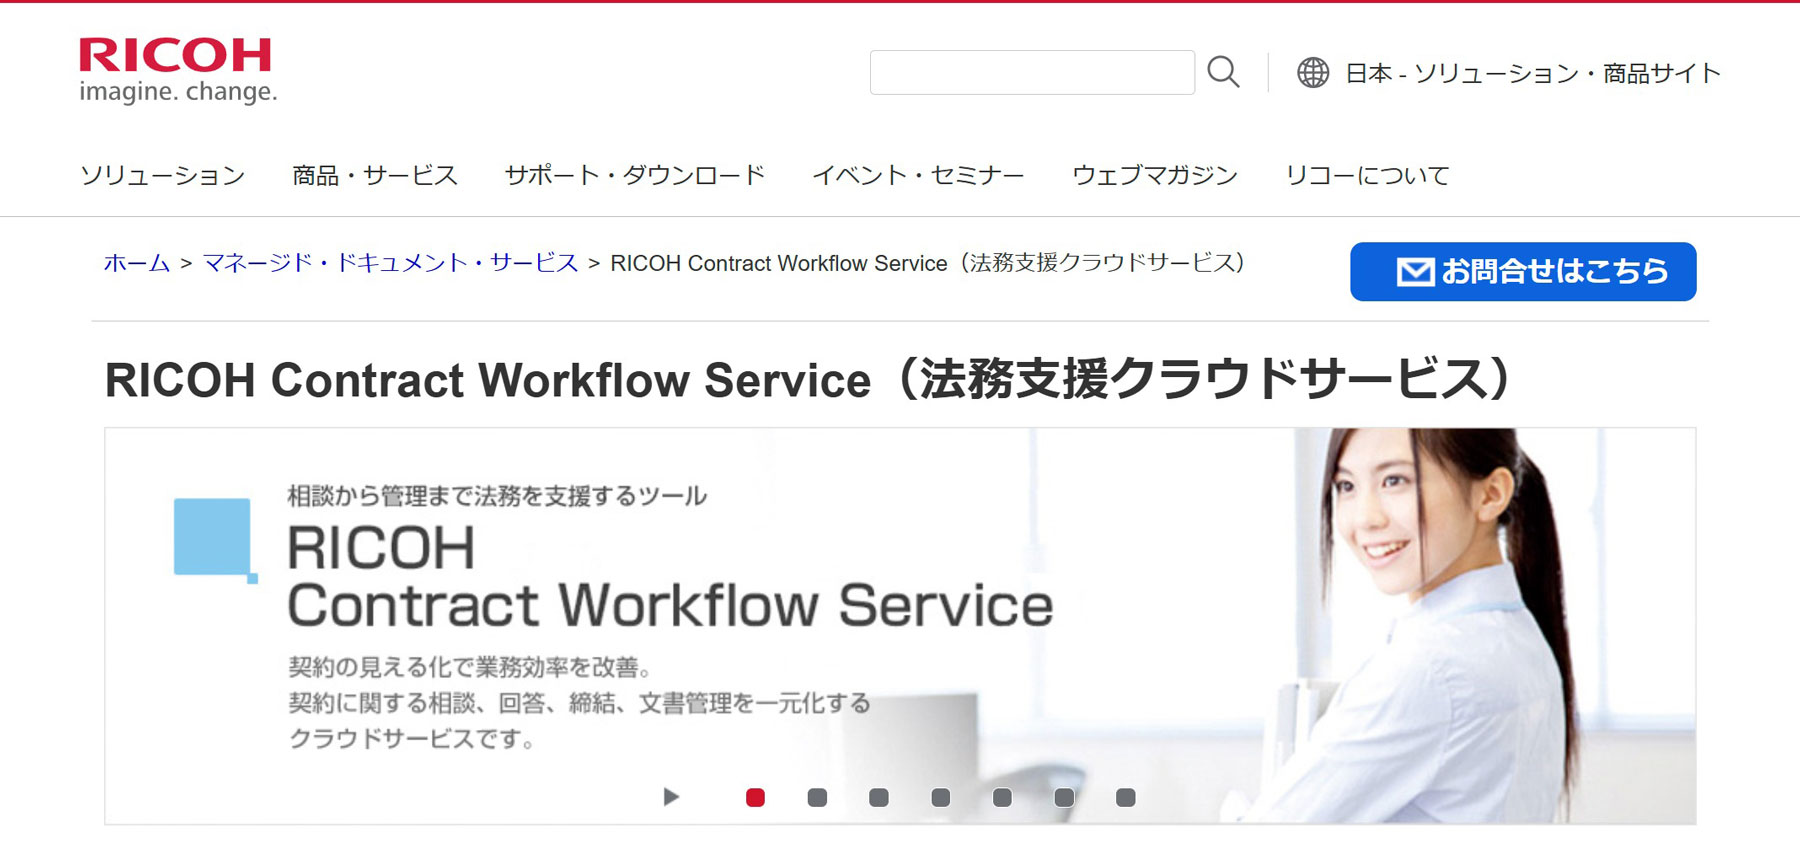 RICOH Contract Workflow Service公式Webサイト